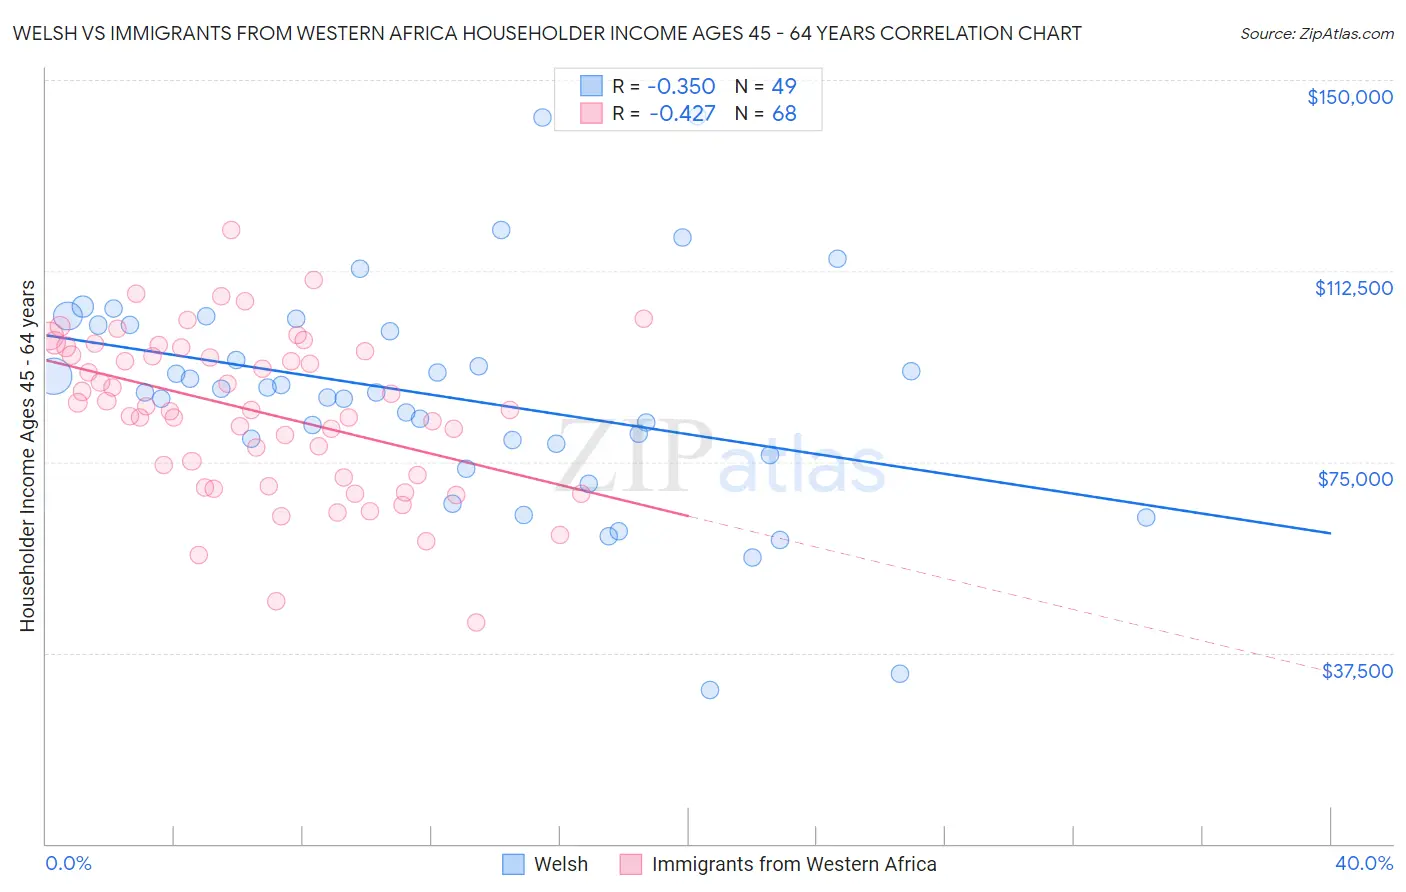 Welsh vs Immigrants from Western Africa Householder Income Ages 45 - 64 years